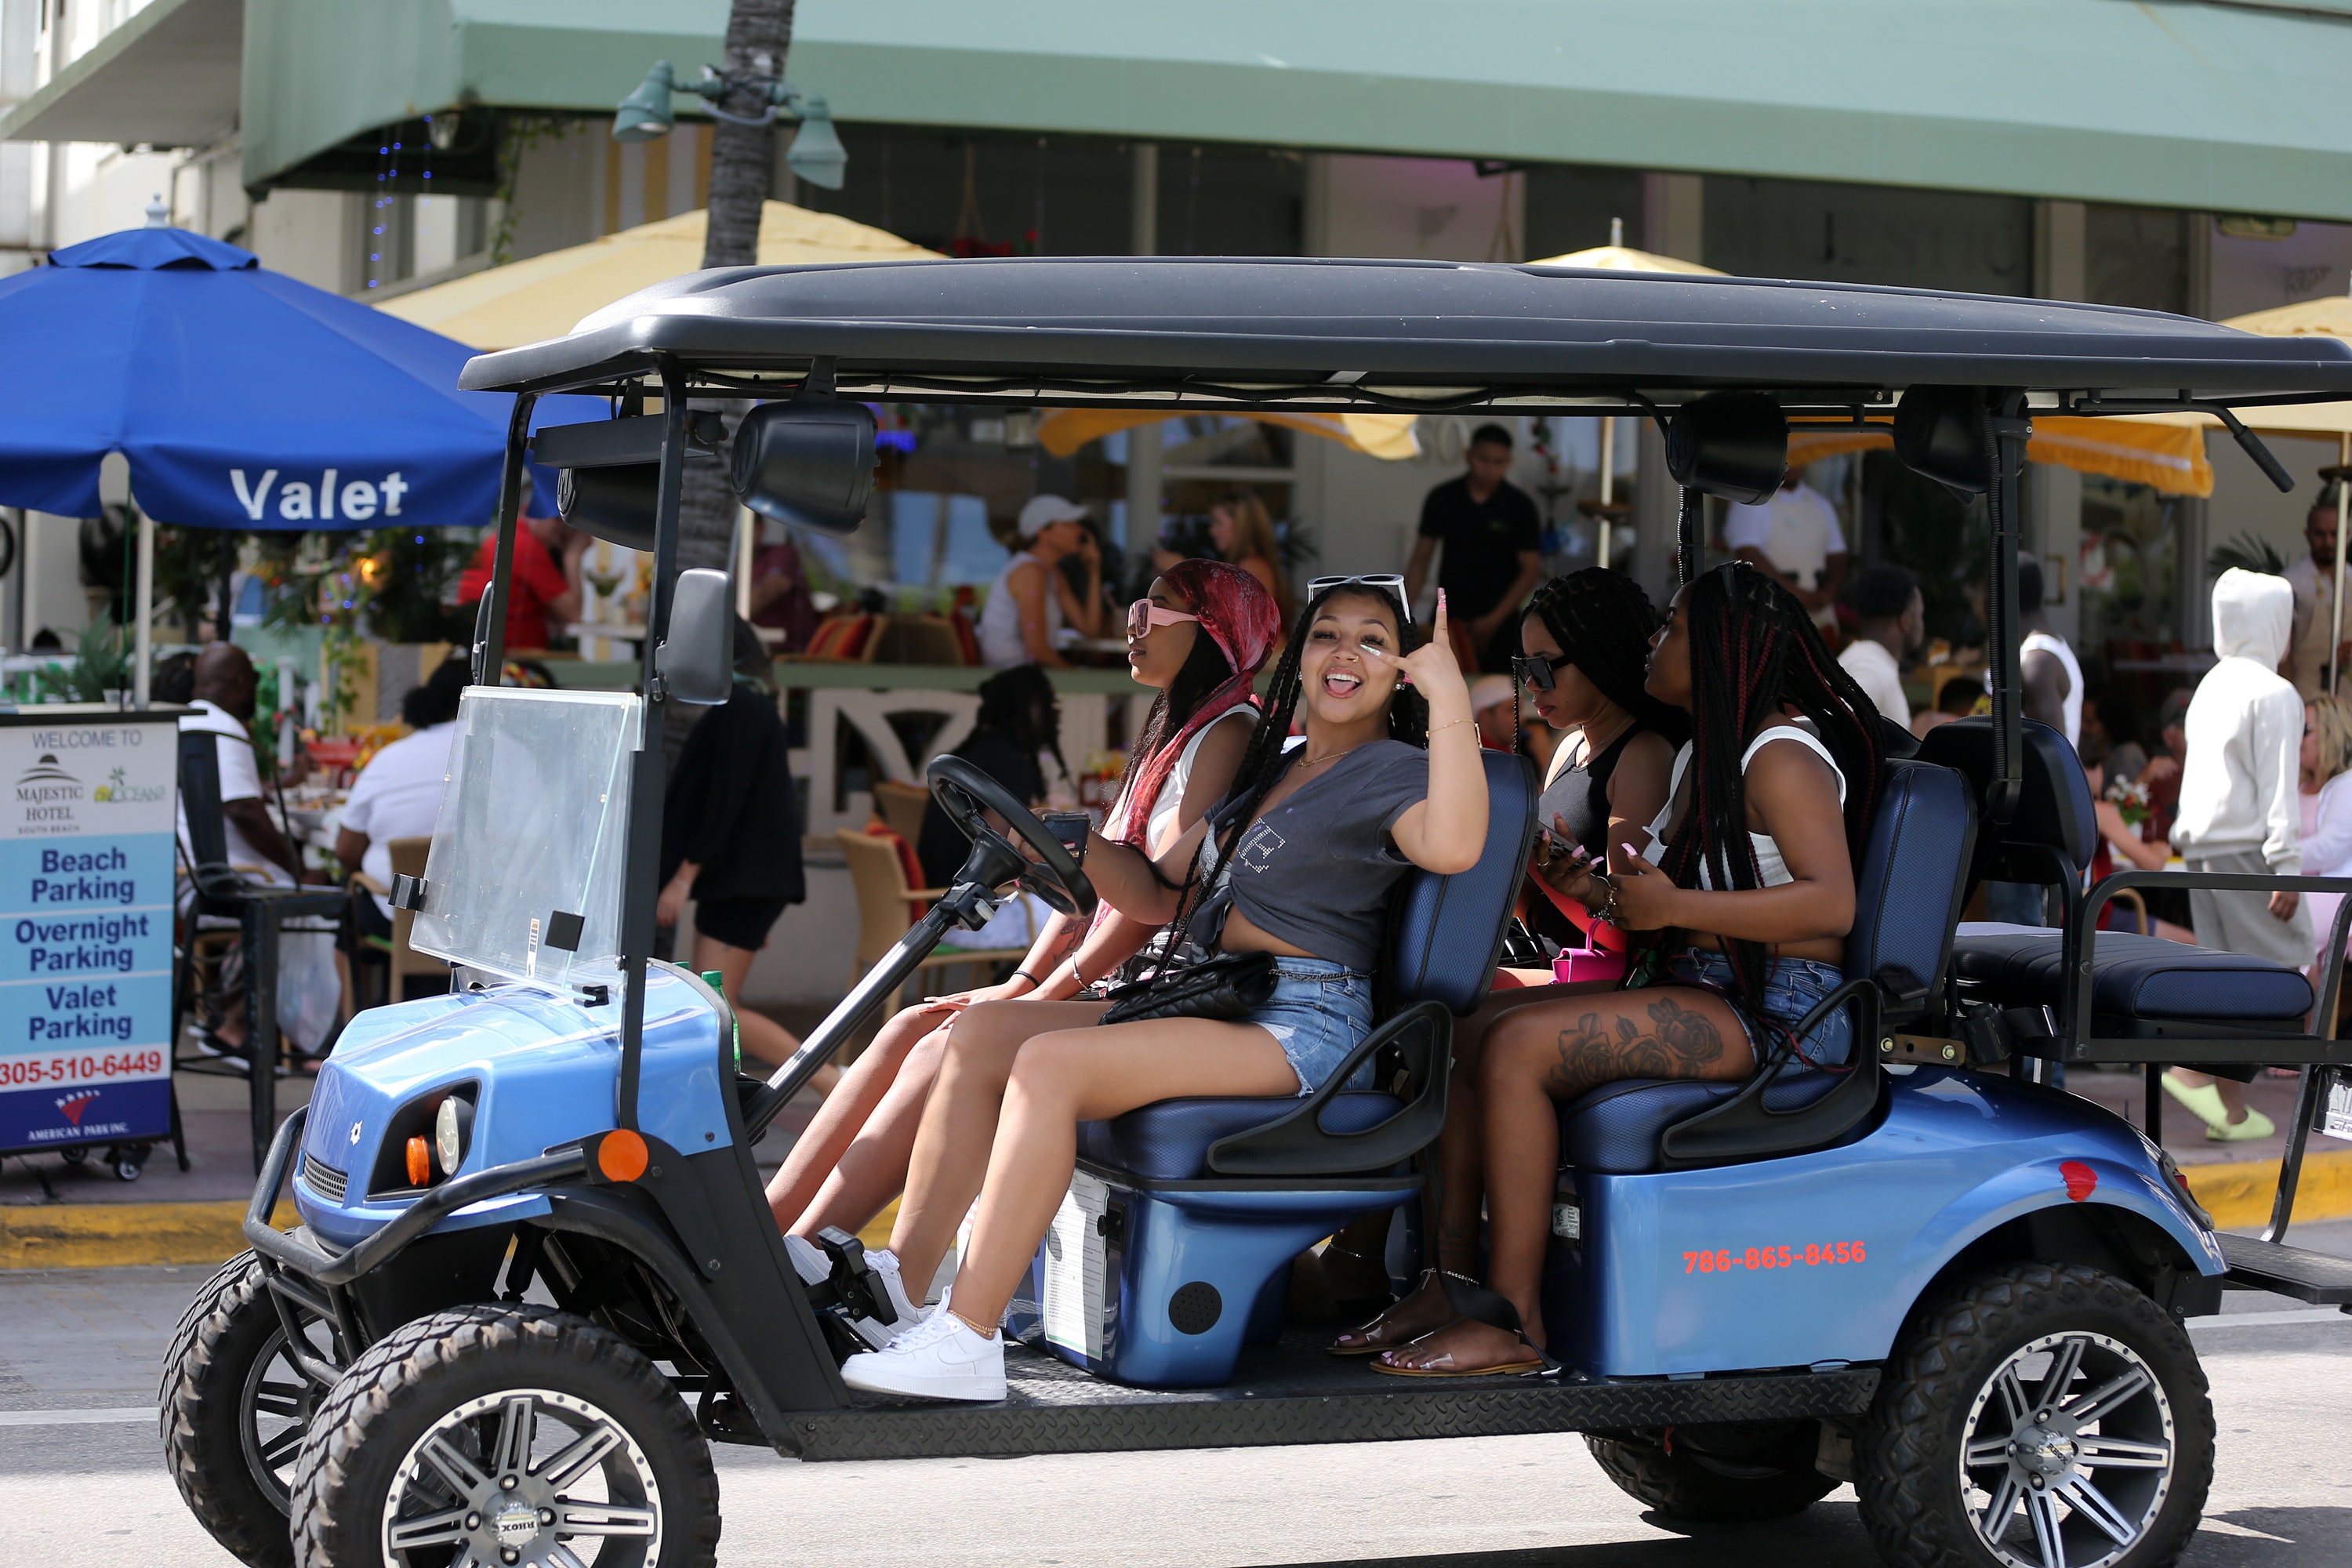 Miami Beach to impose spring break curfew this week after two shootings